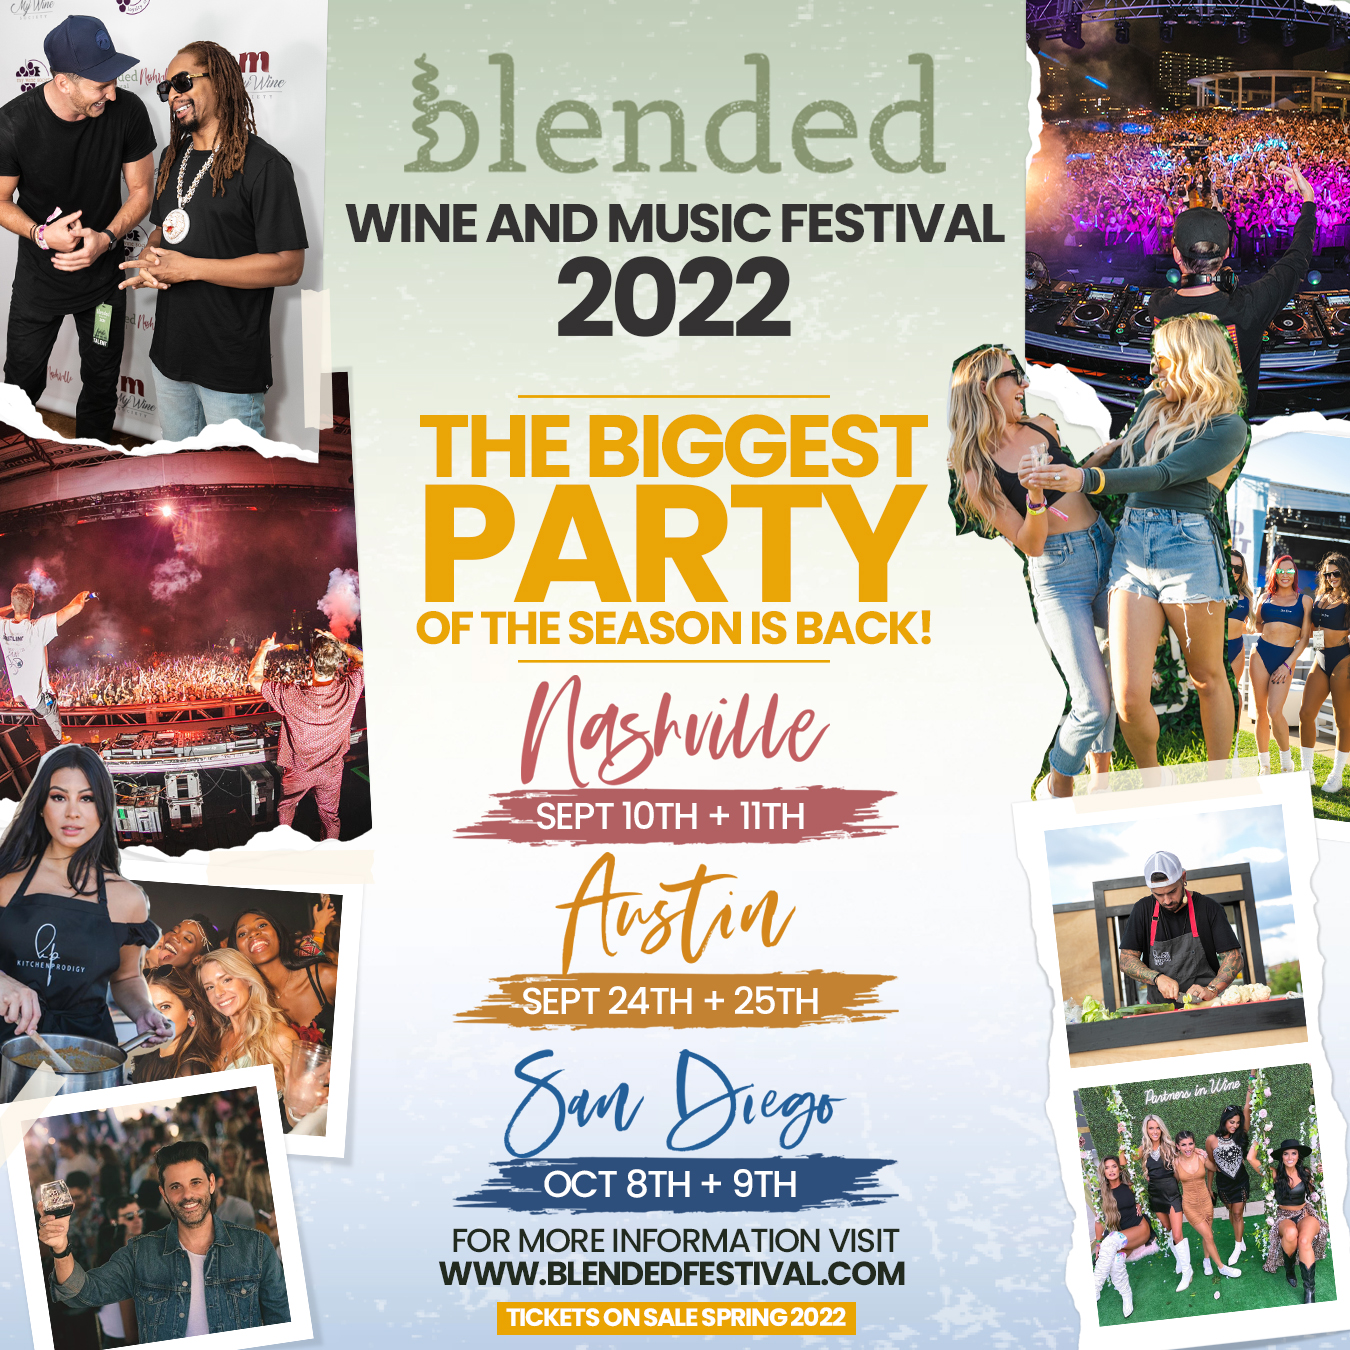 Blended Festival Promo Code, 2022, San Diego, Austin, Tampa, Nashville, Discount Tickets, VIP Passes, GA Passes, Groups, Wine, Drinking, Music, Lineup